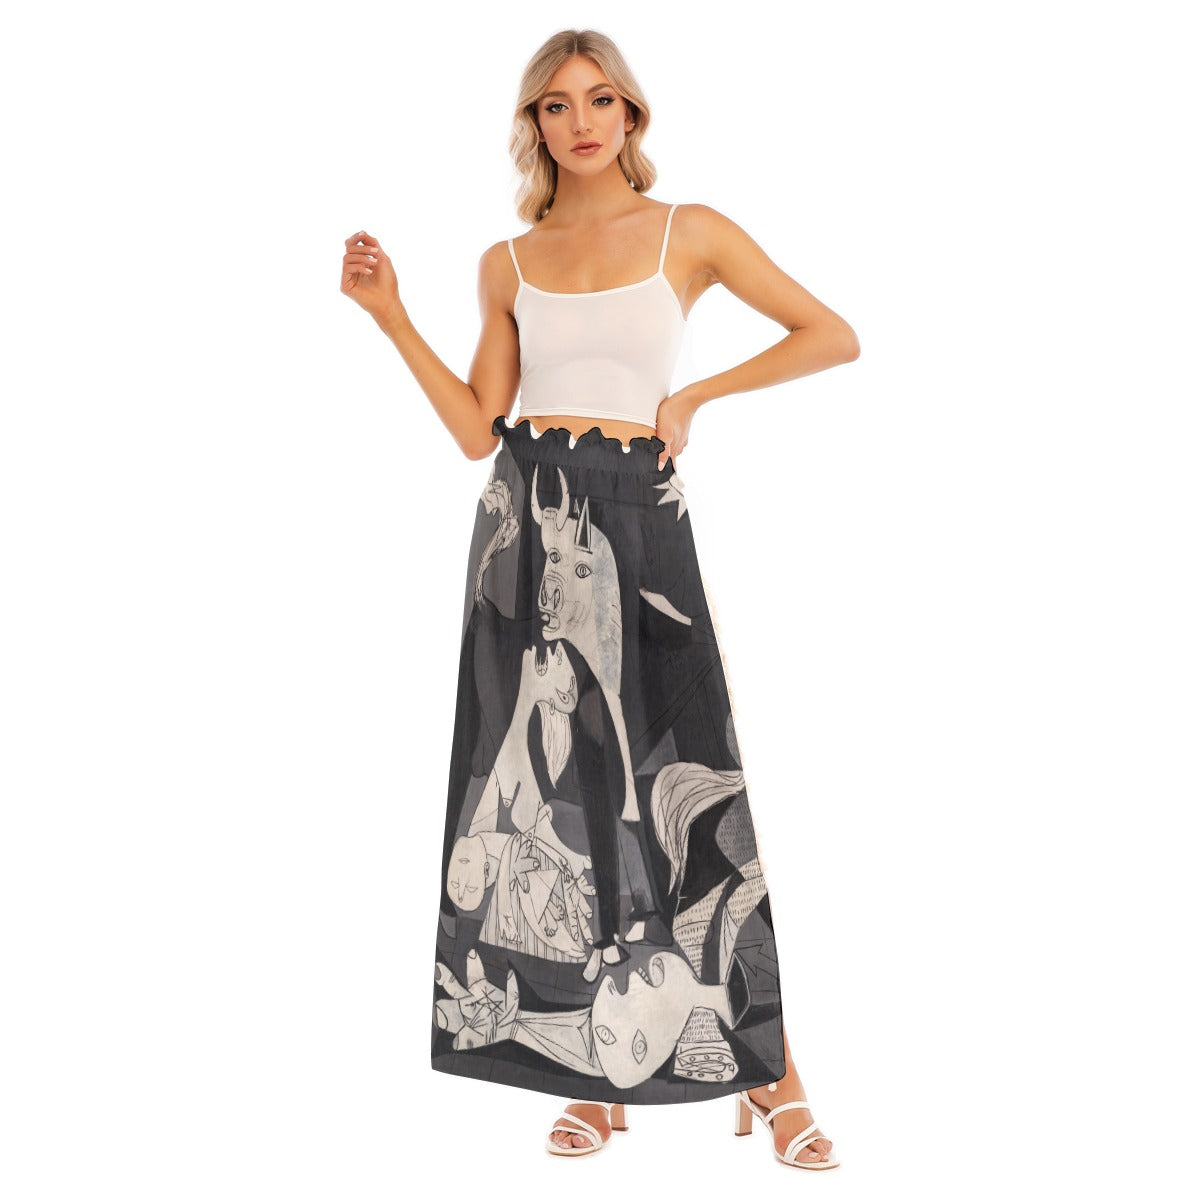 Abstract side split skirt inspired by Guernica